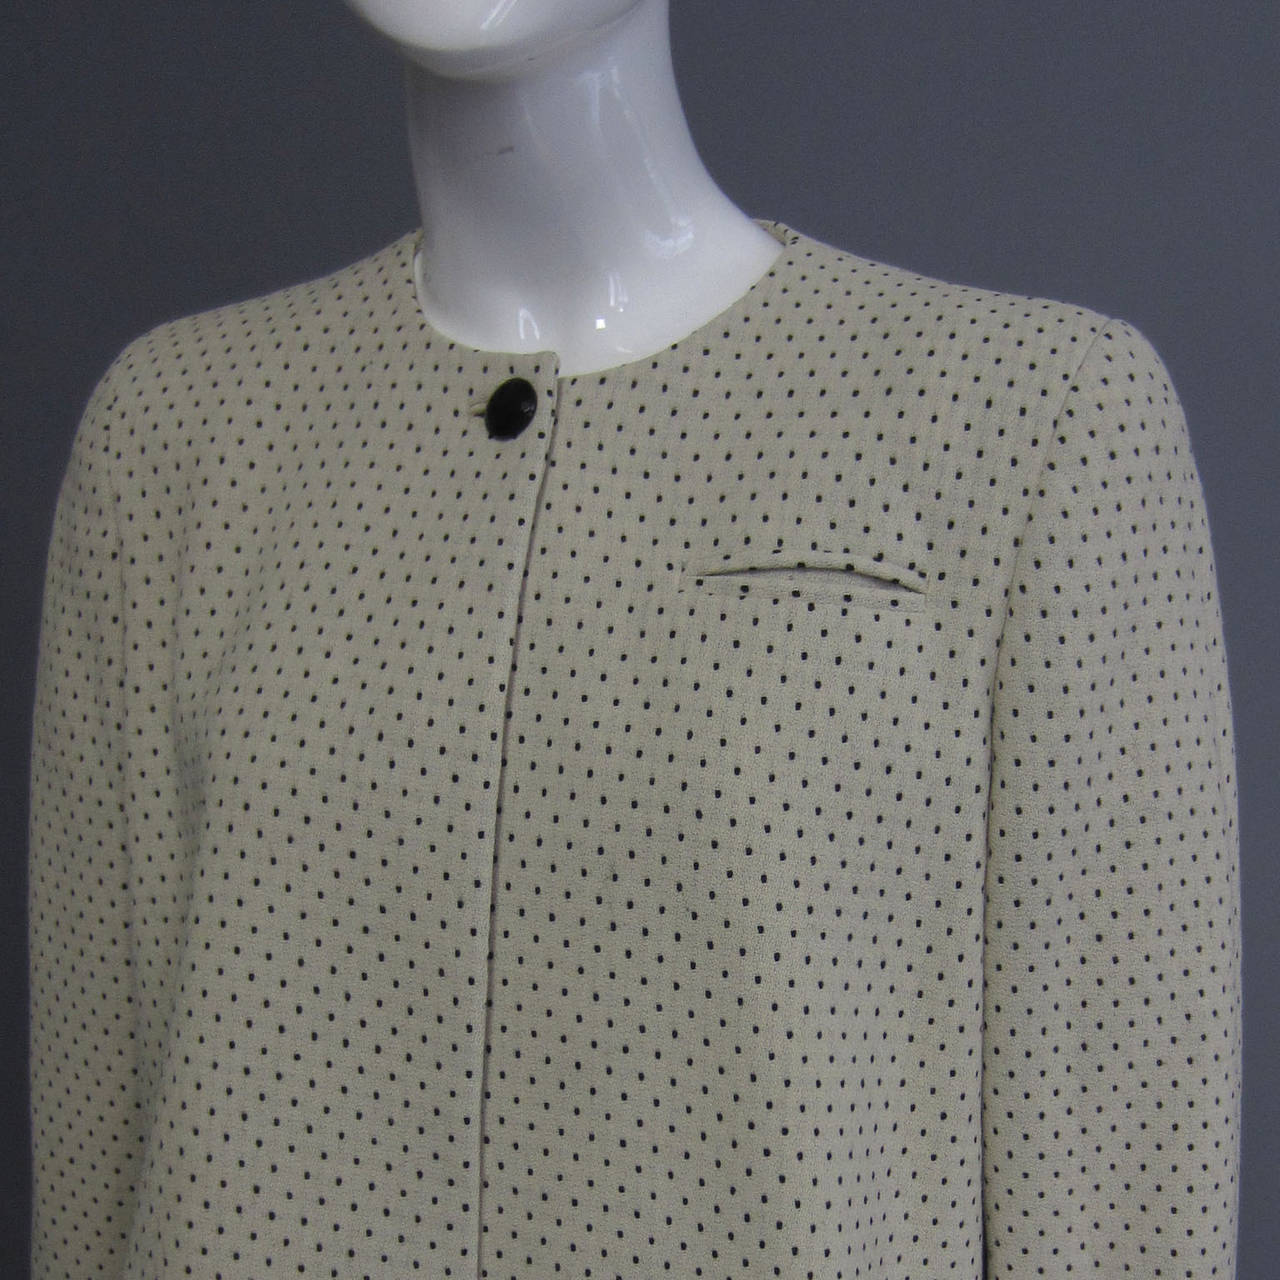 A tiny, black polka dot is set against a creme wool background. The print is faint, but adds texture. The jacket is cropped, hitting at the waist. The jacket is slightly longer in the back, which also features extra fabric to create a swing effect.